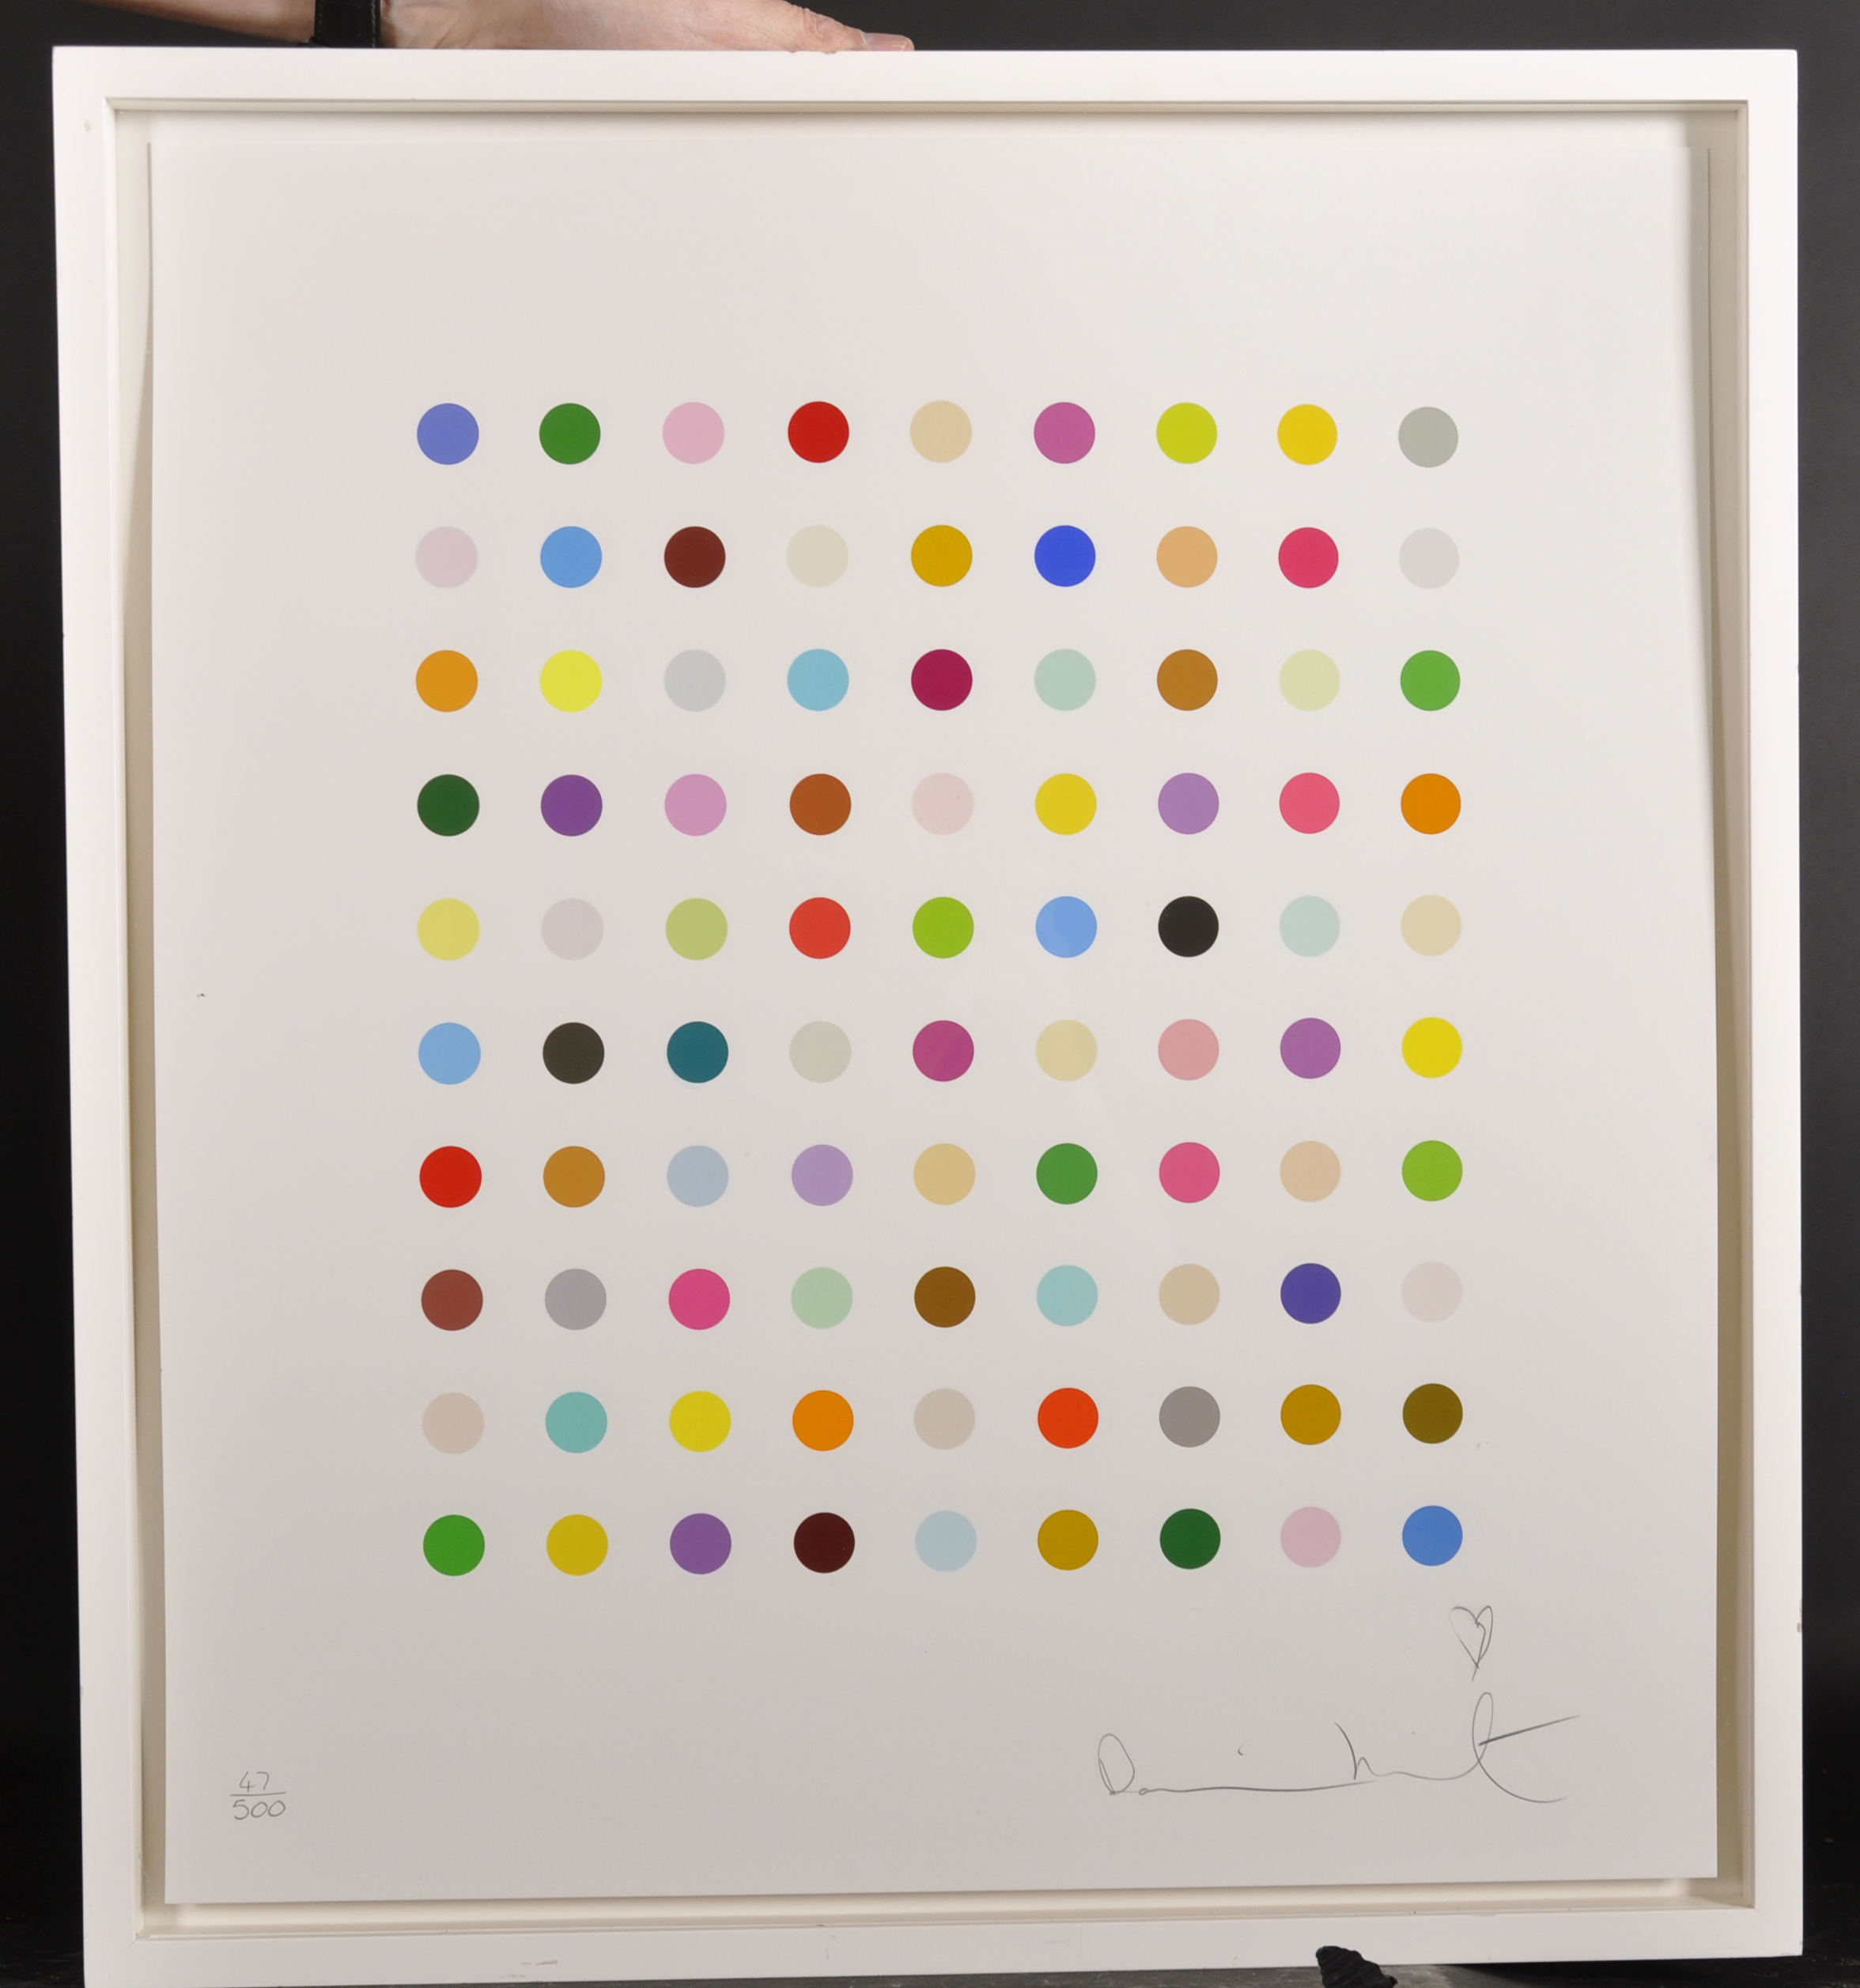 Damien Hirst (1965- ) British. "Spot", with Ninety Colour Spots on a White background, Limited - Image 2 of 6